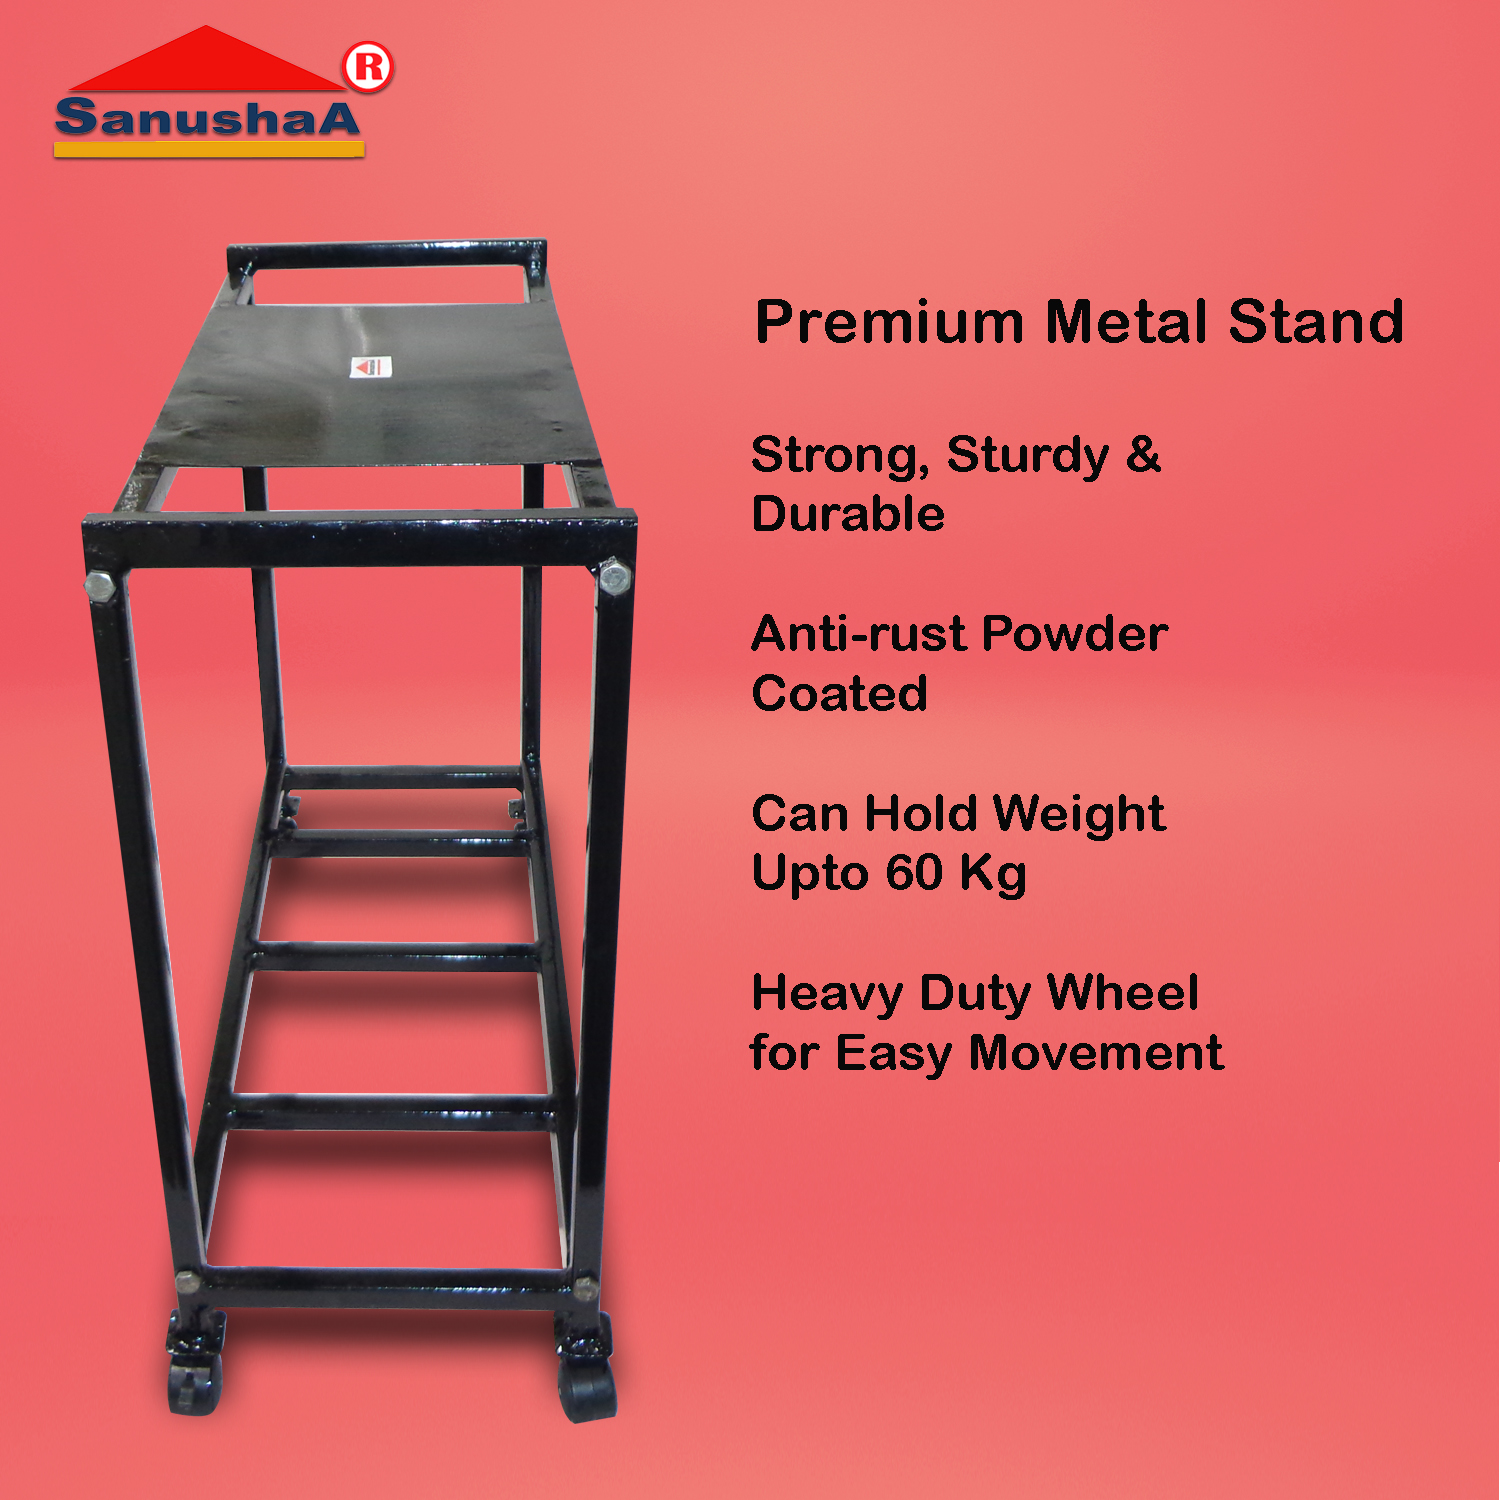 Sanushaa Inverter Metal Trolley for Home Tier 2, buy the best UPS metal Trolley with battery load capacity products website www.sanushaa.in